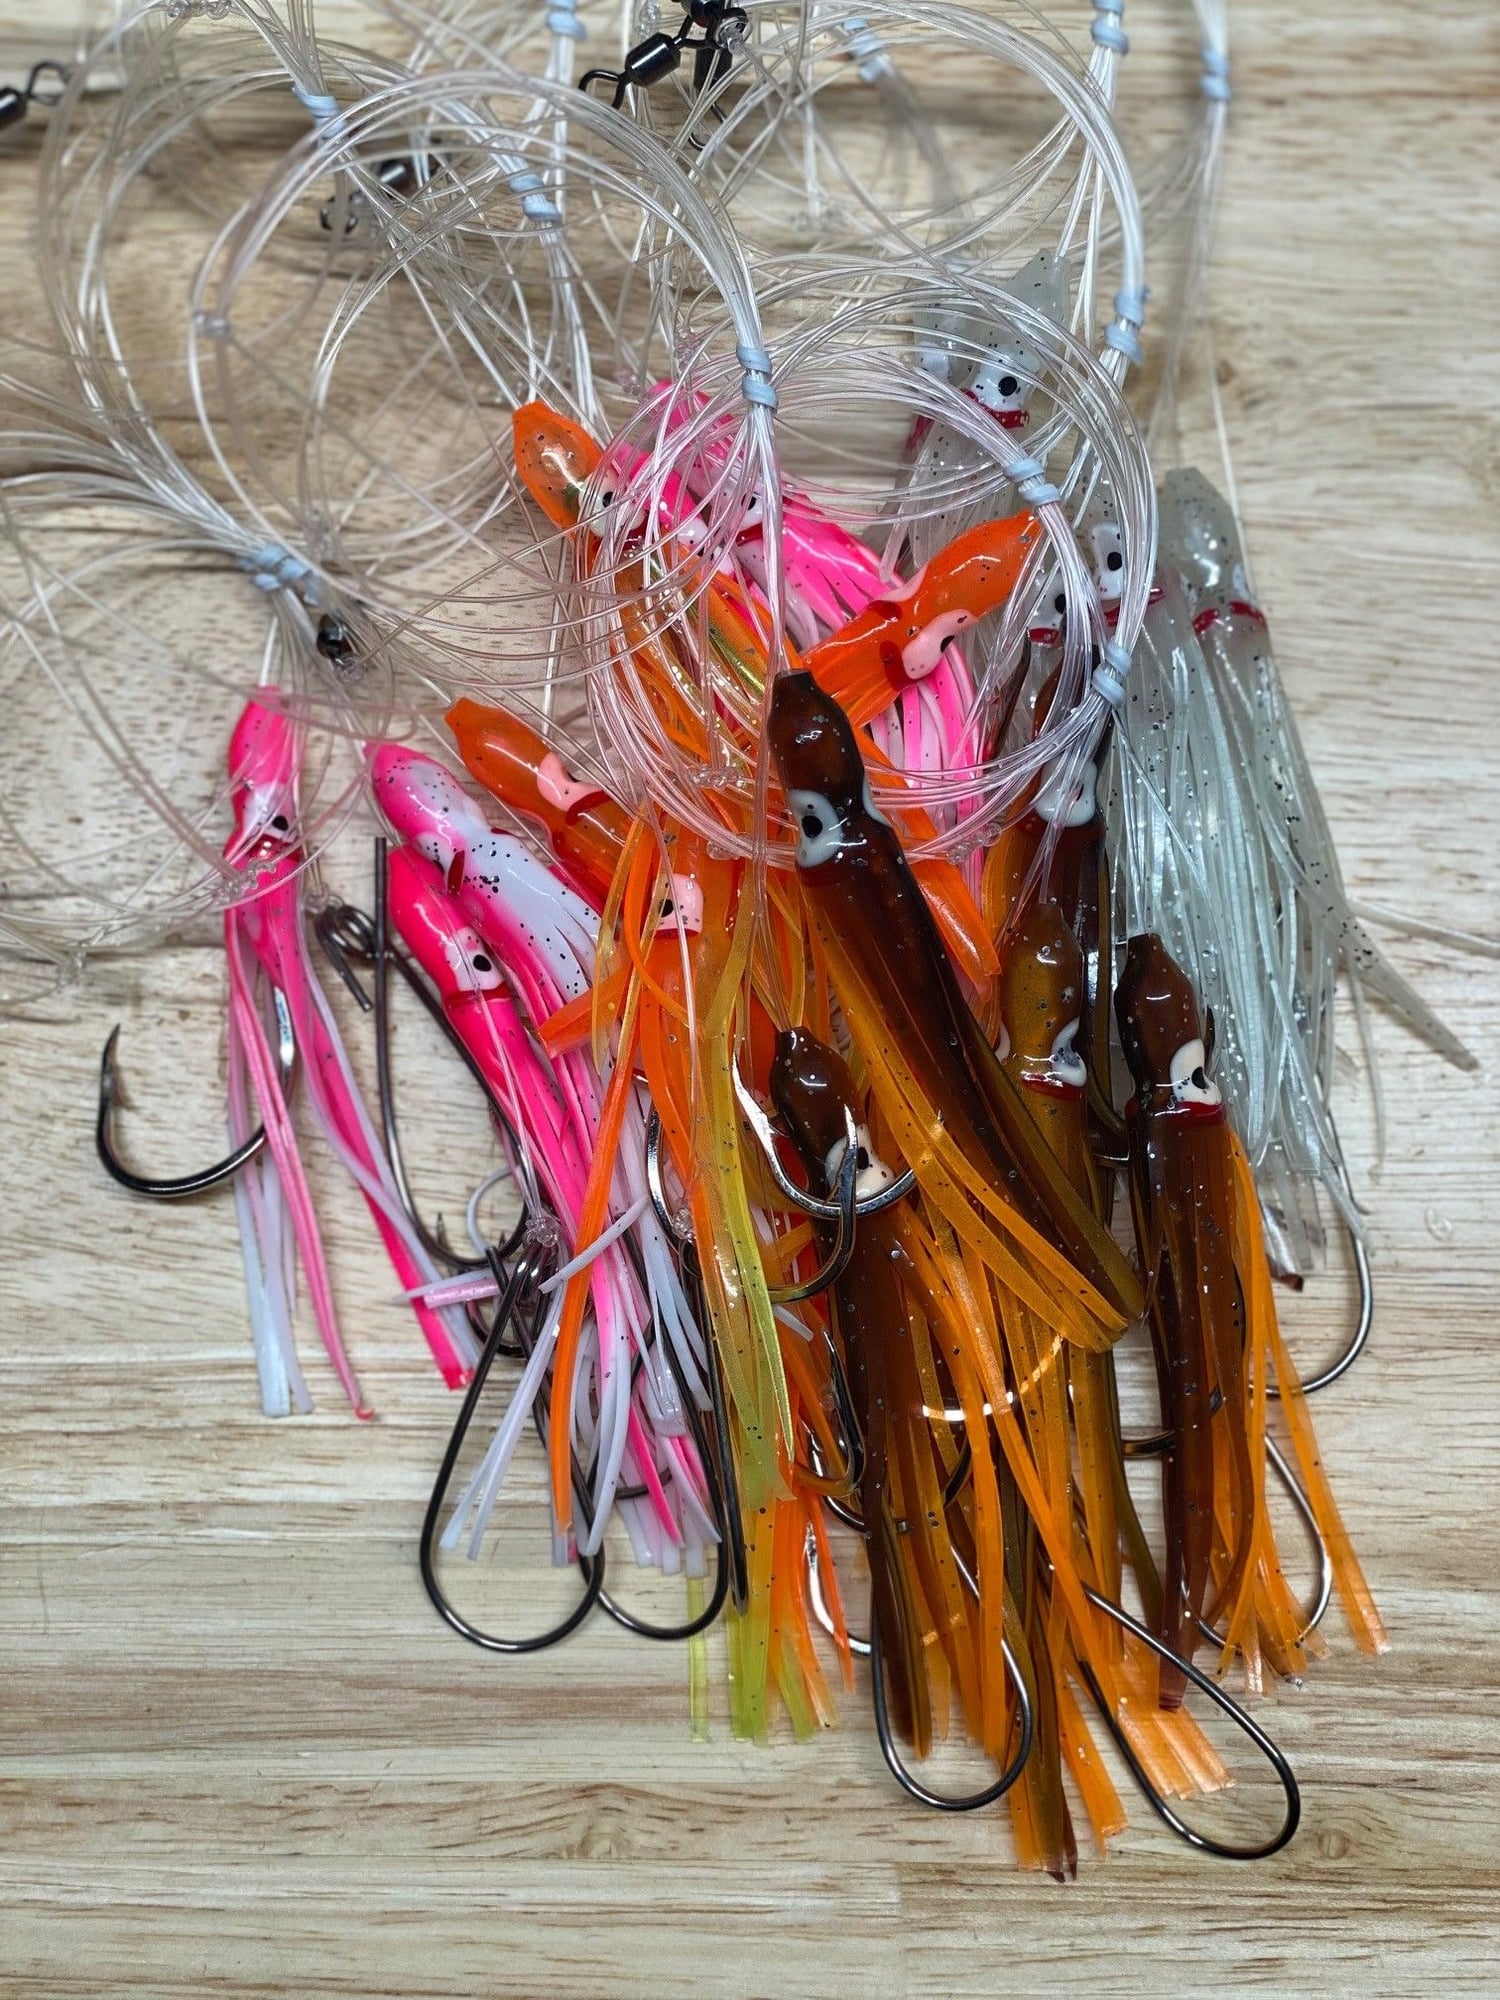 Rigs and Jigs for All Seasons - The Hull Truth - Boating and